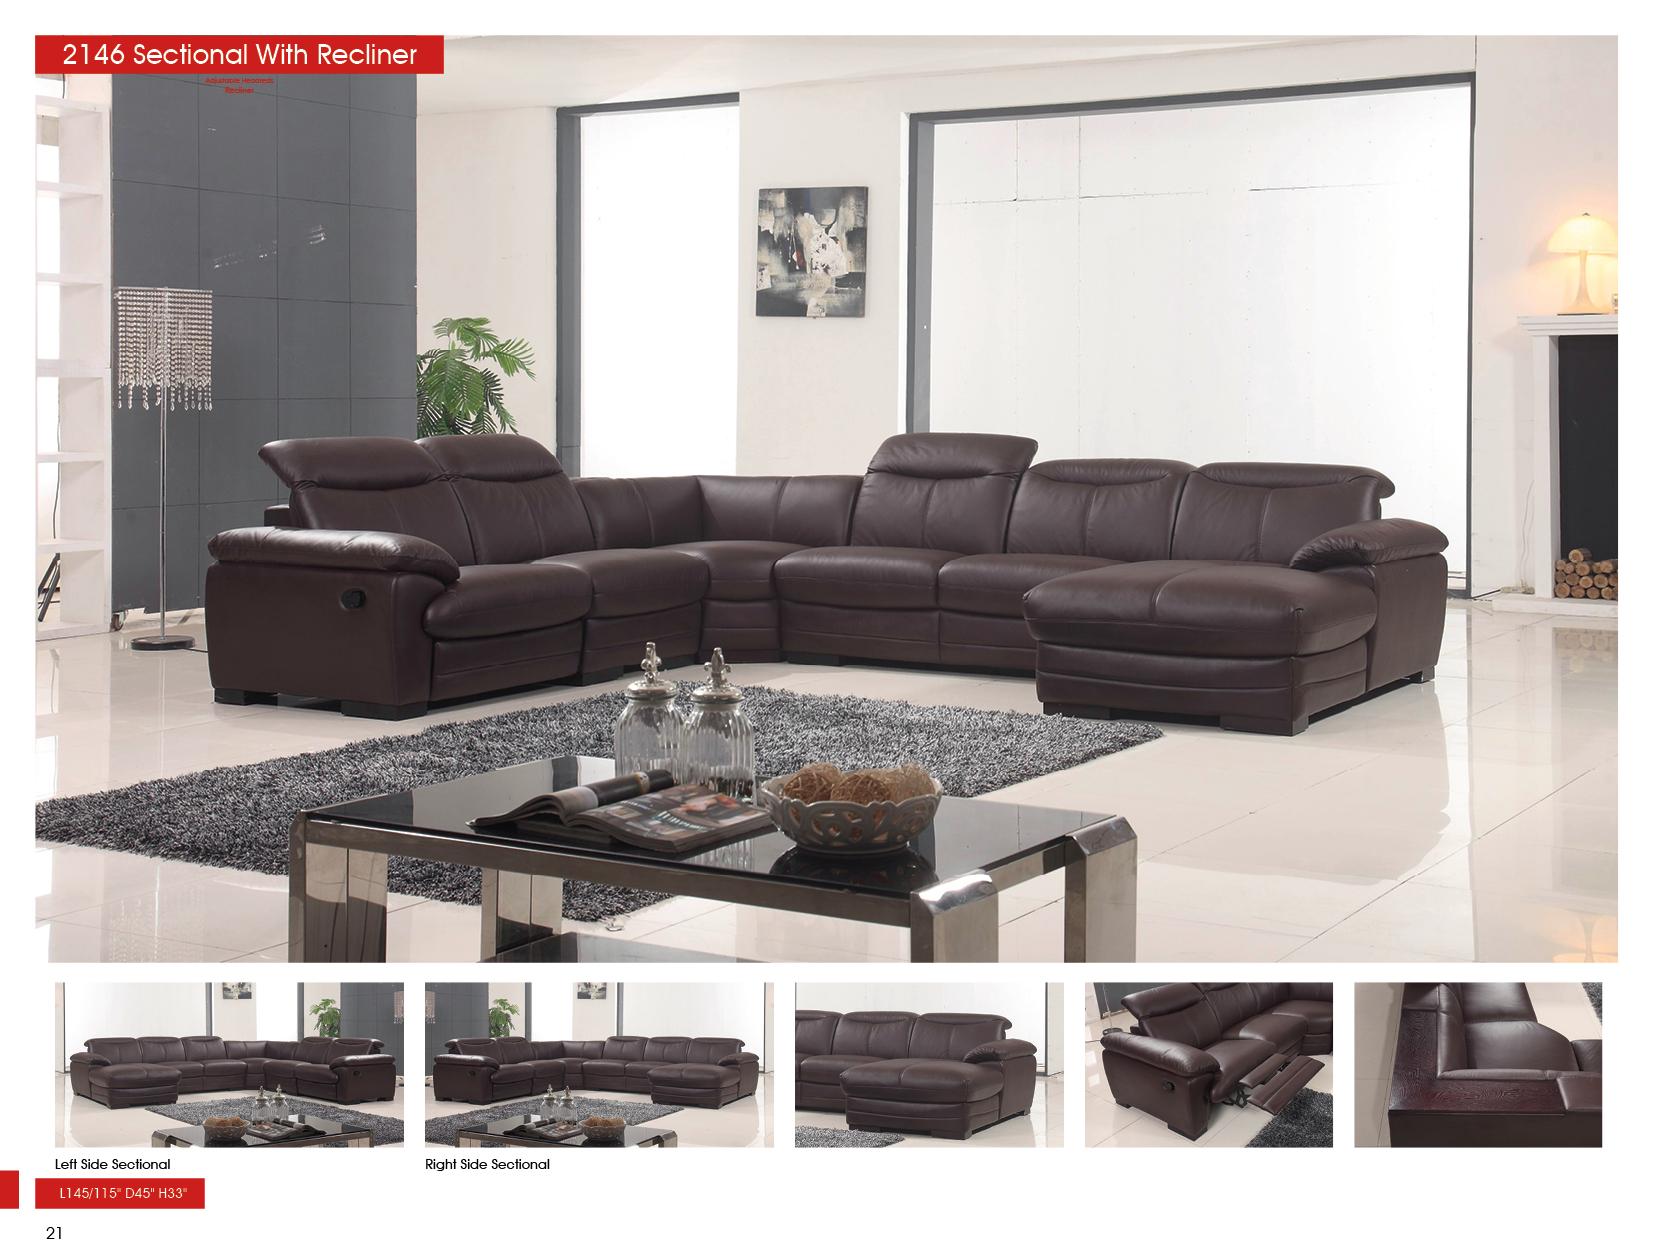 Contemporary Sectional Sofa 2146SECTIONALRIGHT 2146SECTIONALRIGHT in Brown Top grain leather